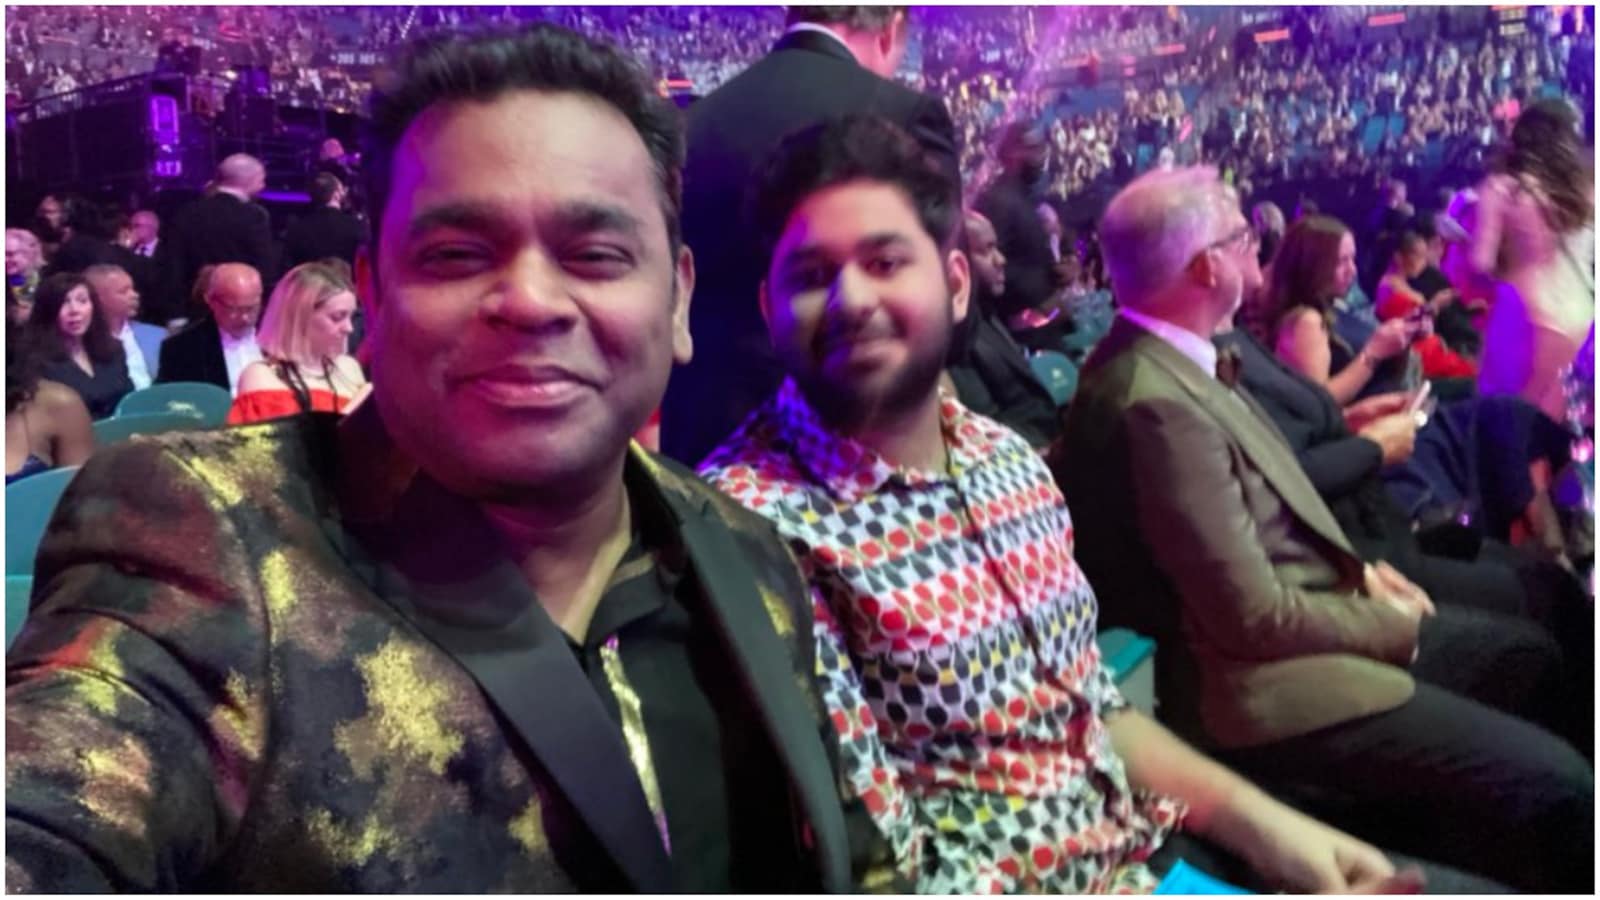 AR Rahman shares selfie with son from Grammys; 'Parenting'